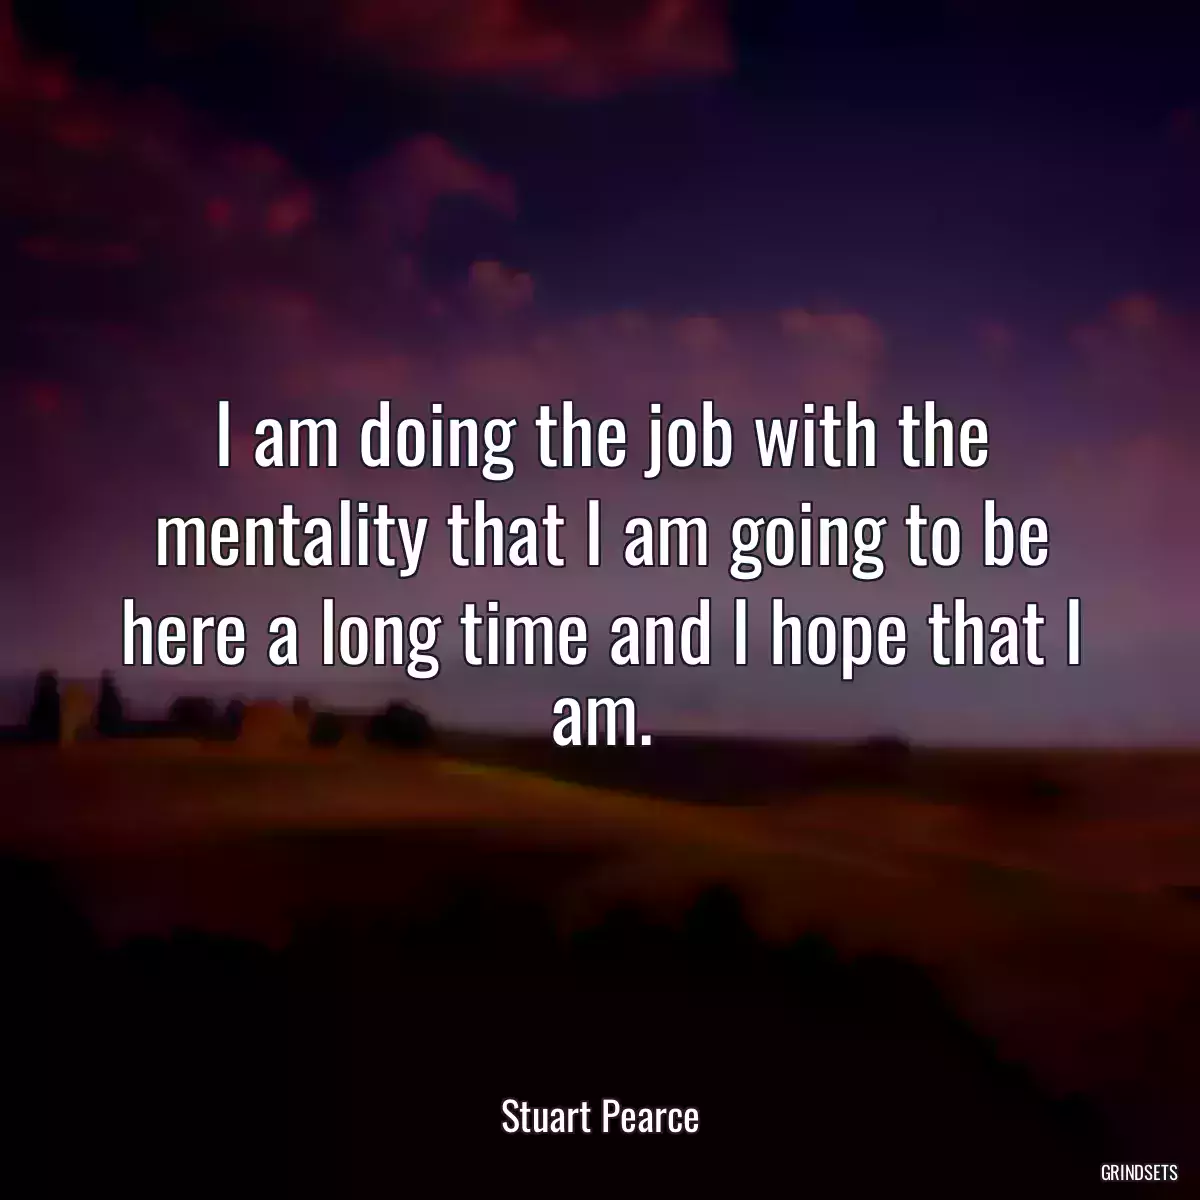 I am doing the job with the mentality that I am going to be here a long time and I hope that I am.